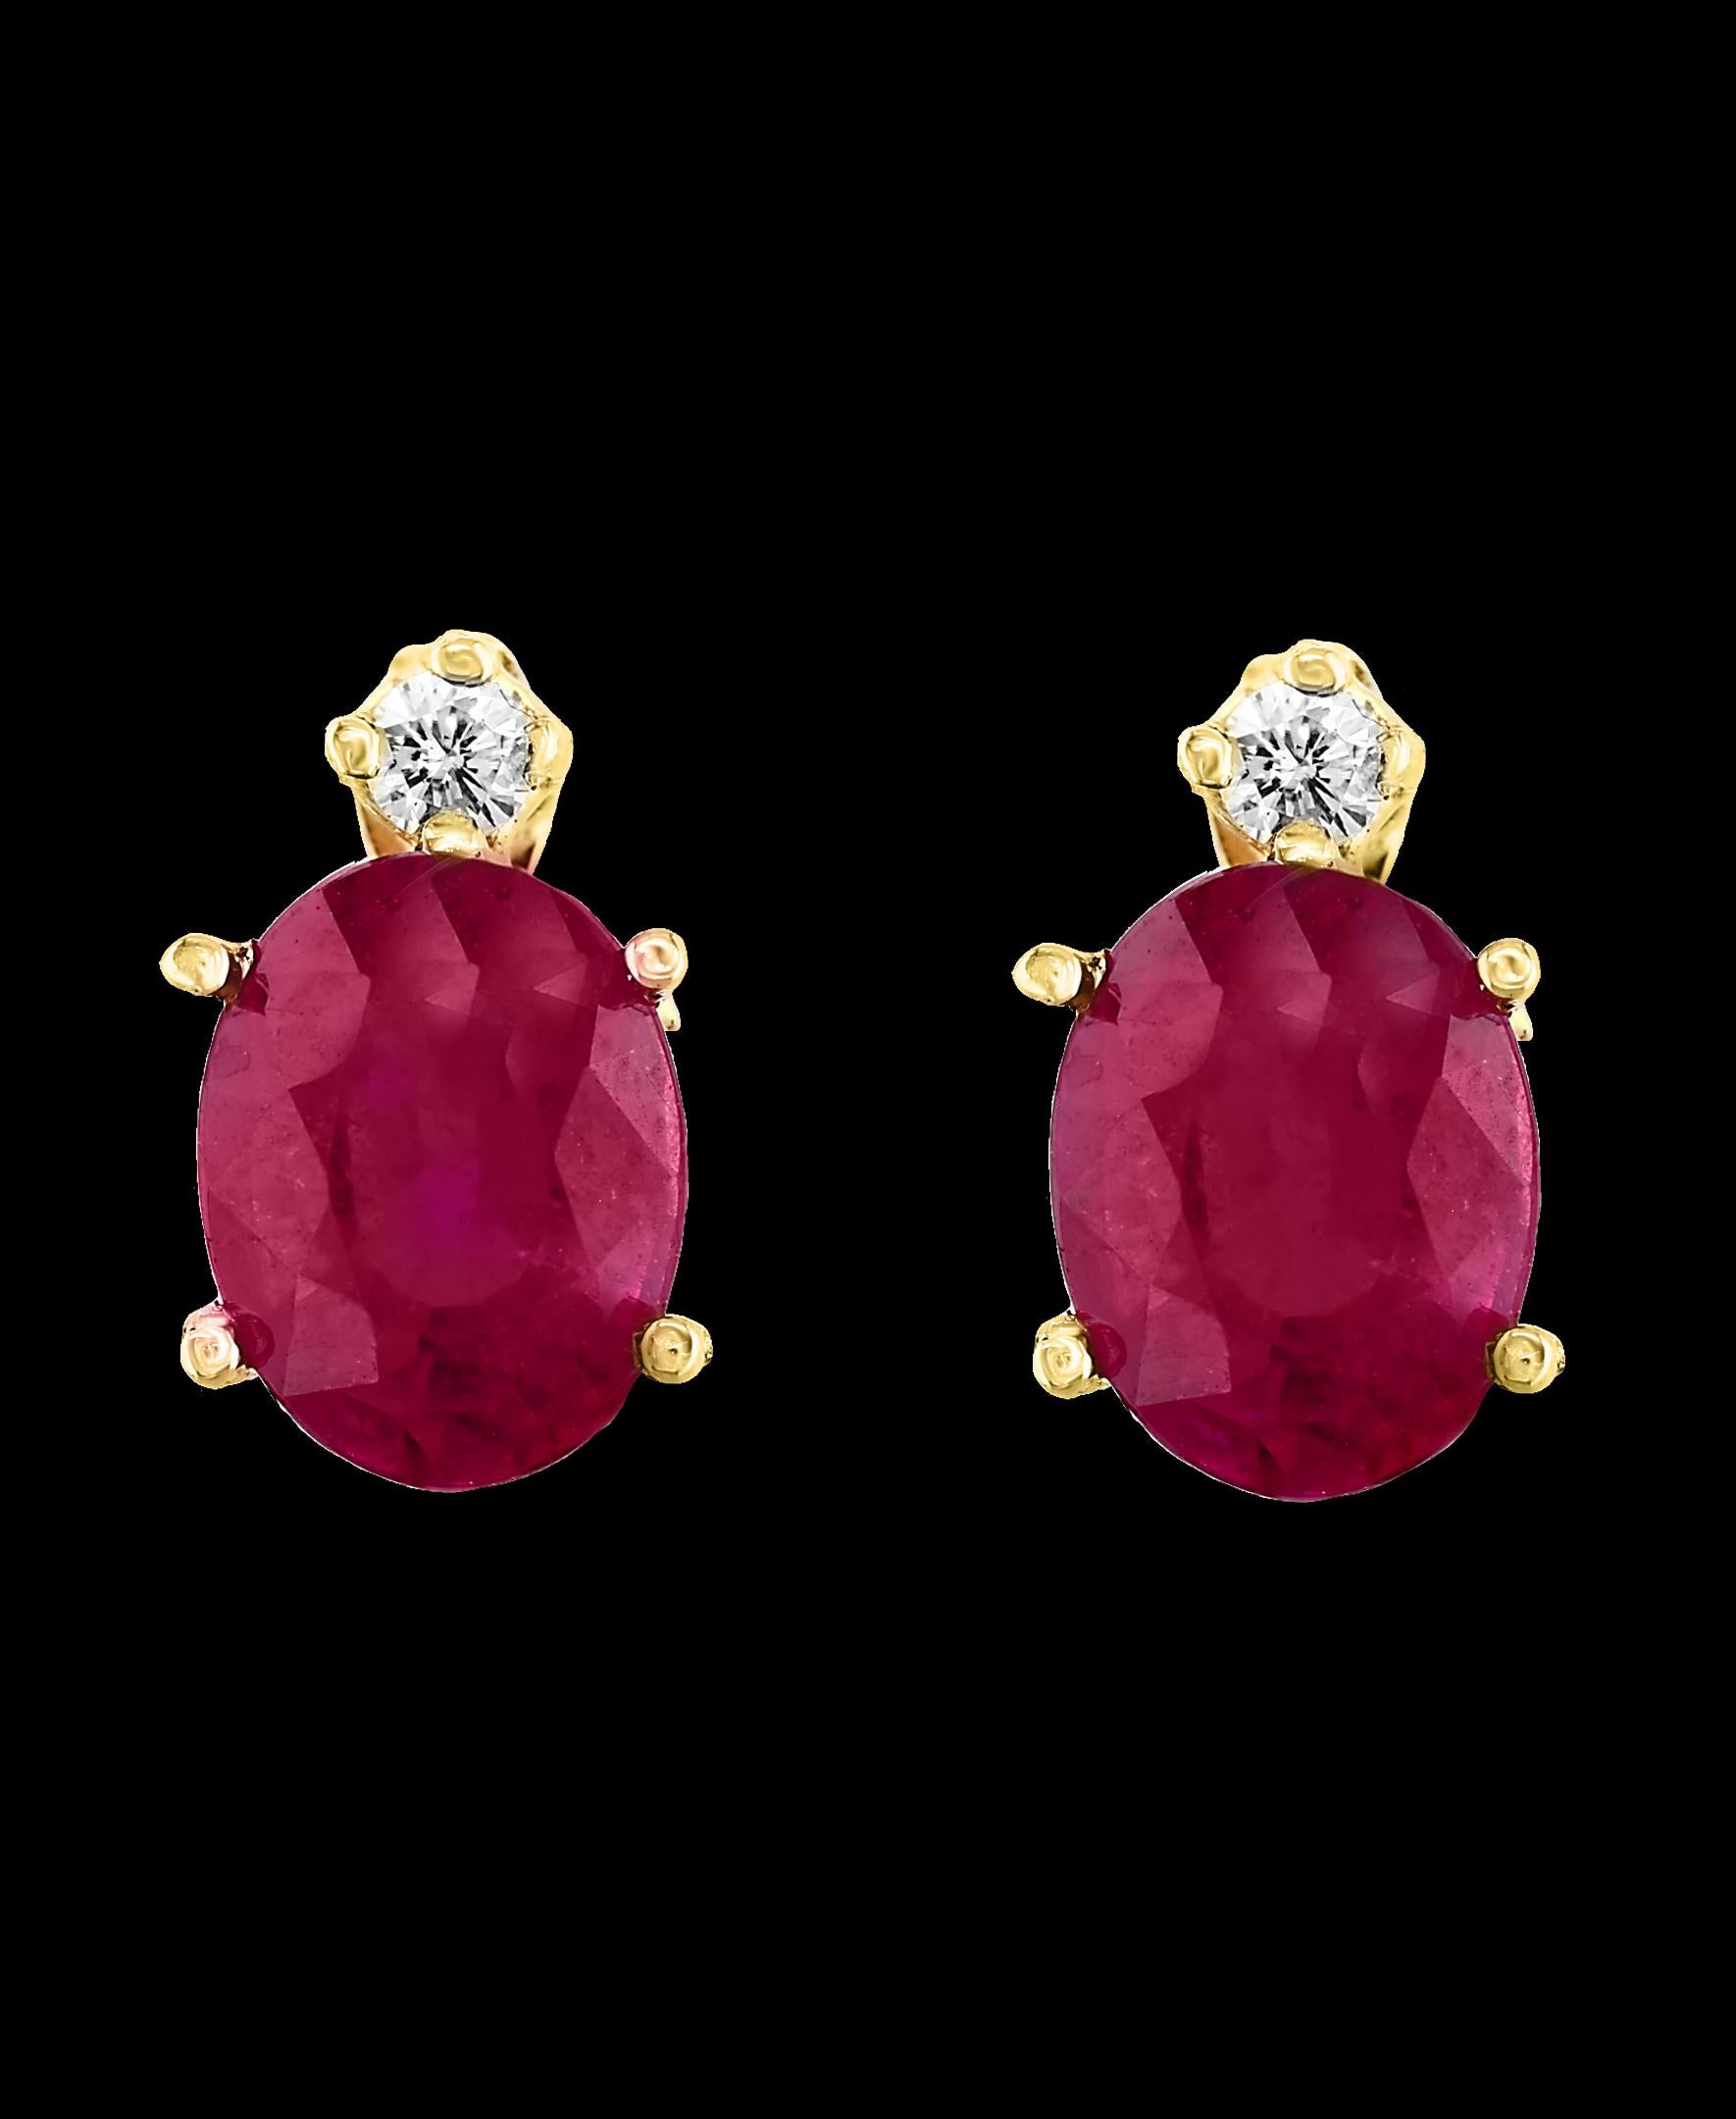 
1.70 Carat 7 X 5 MM Oval Natural Ruby stud Post Earrings 14 Karat Yellow Gold
Two Rubies weighing 1.7 carats Total
Each Ruby is 0.85 Ct
Each stud has a tiny but very shiny diamond on the top of the Ruby.
Very Fine quality of Ruby is used to make